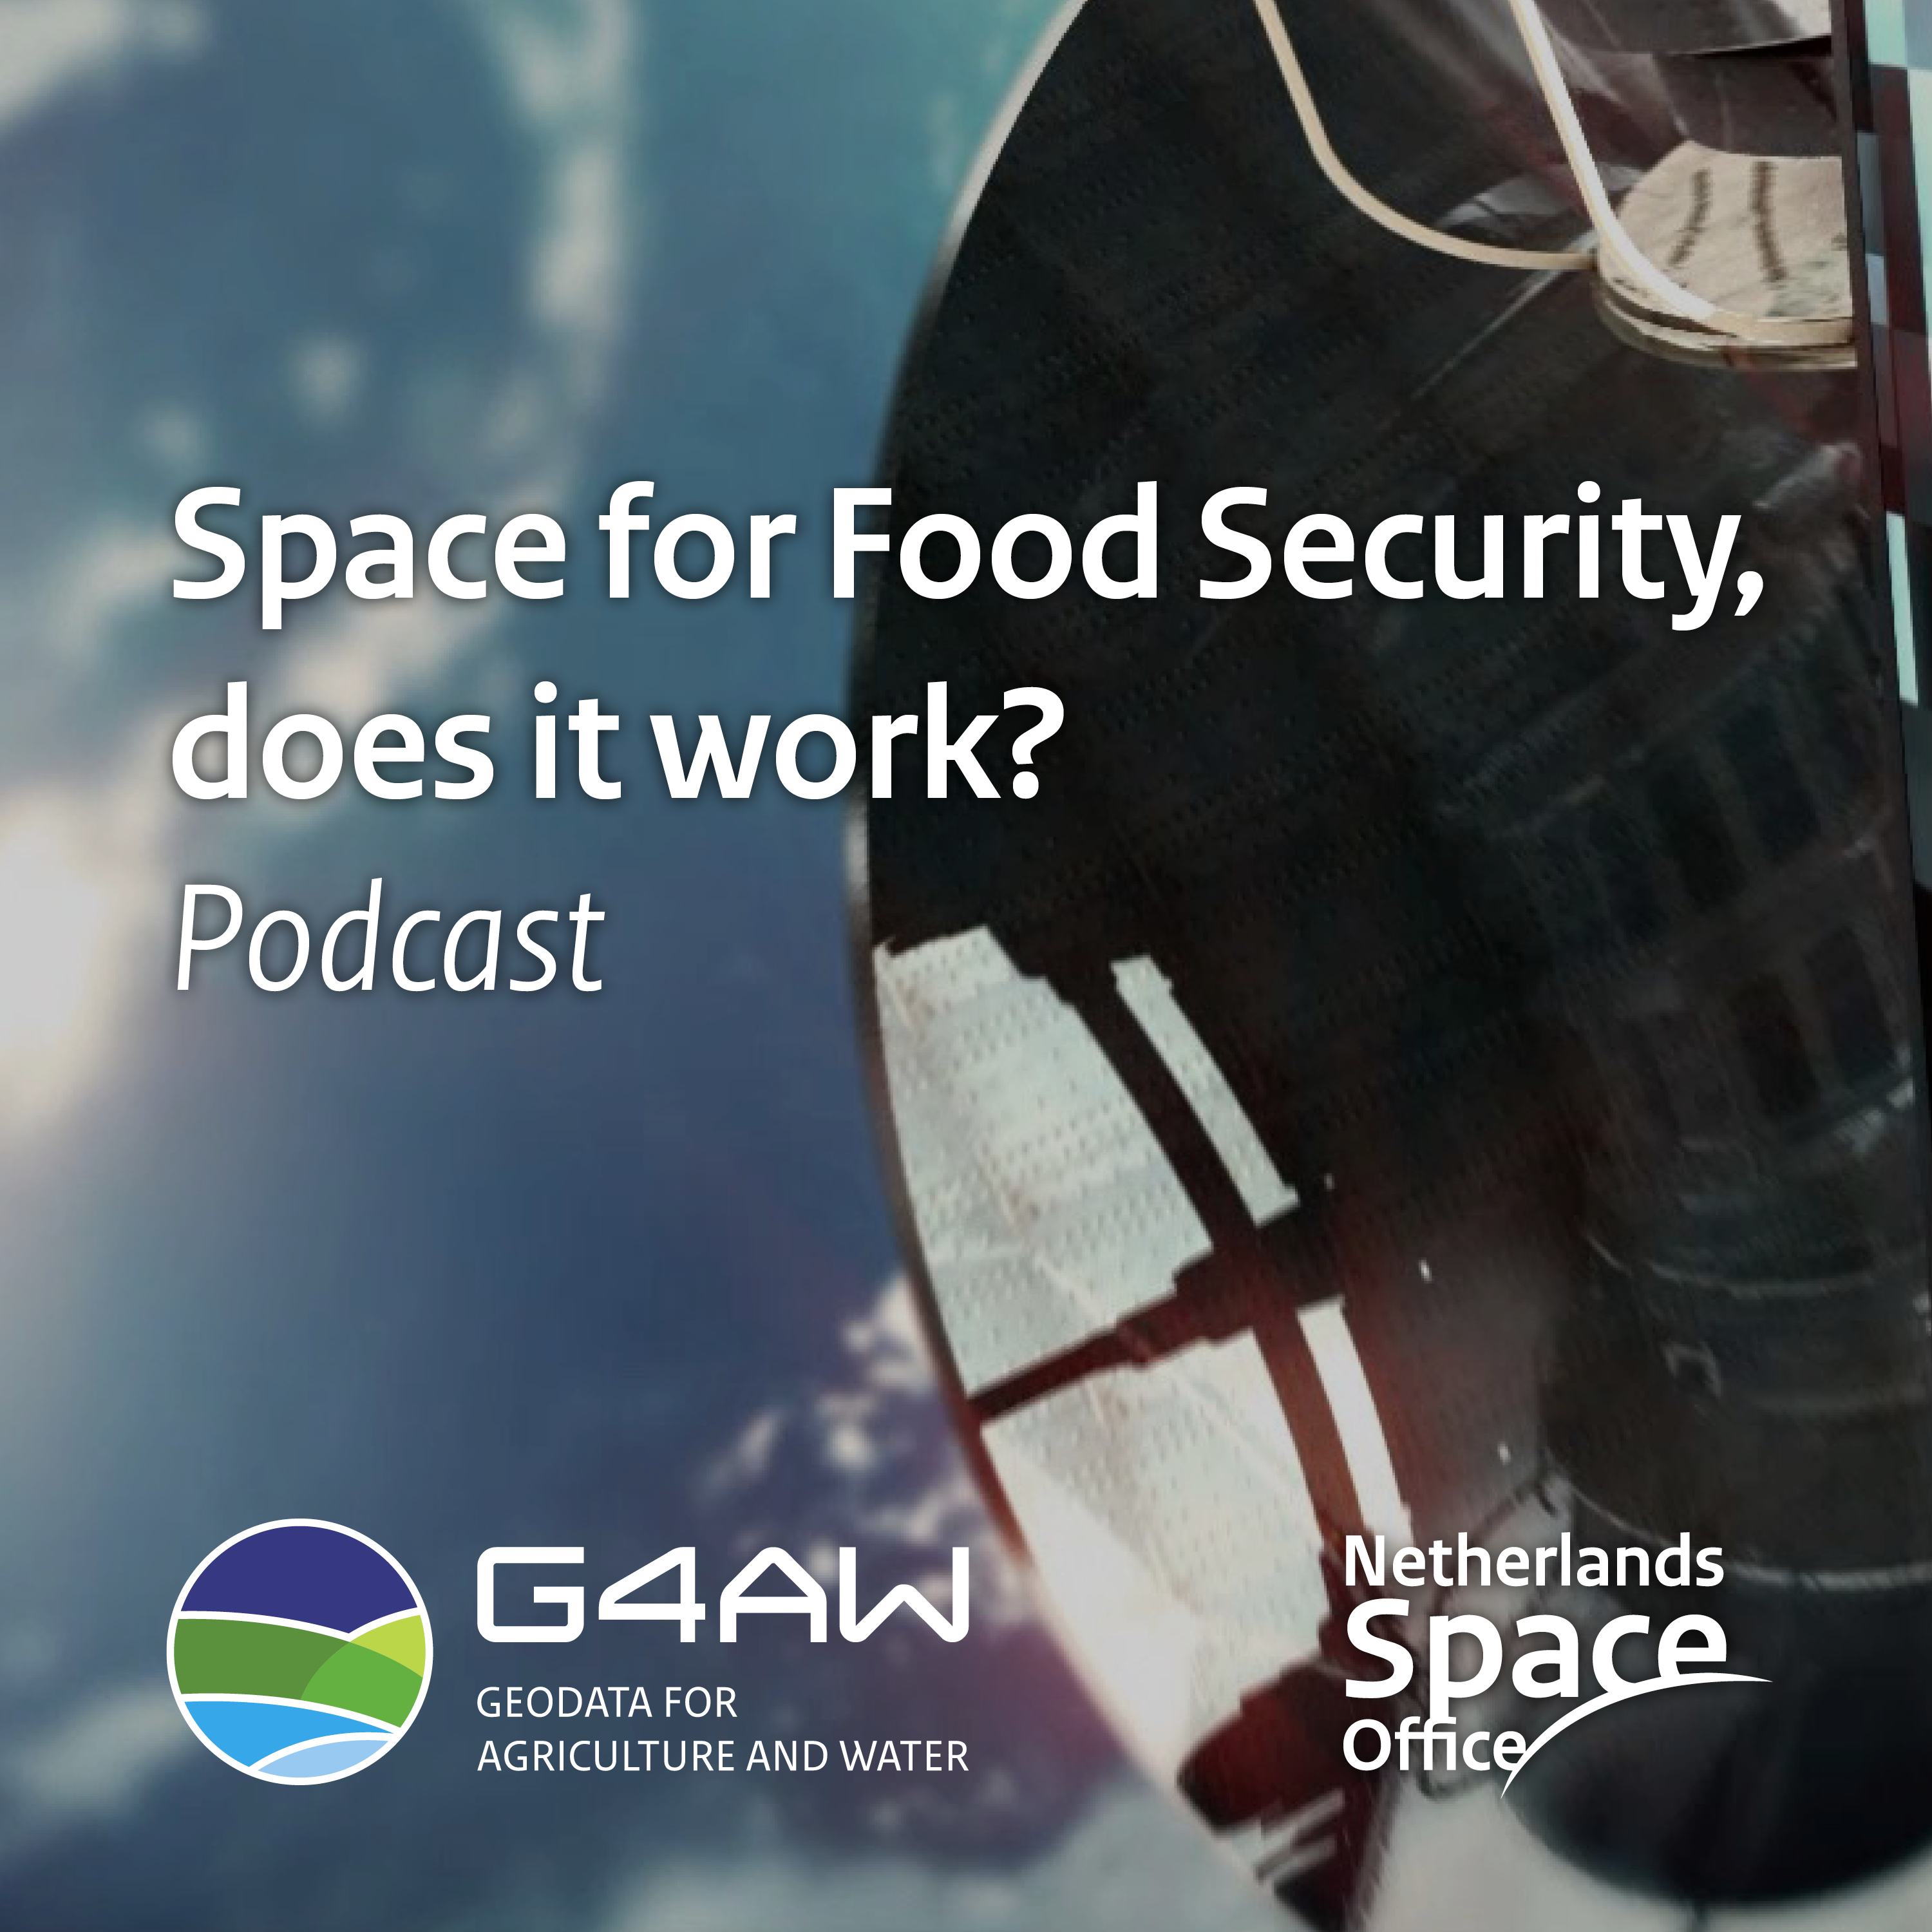 Upcoming Conference - Space for Food Security: On the Right Track